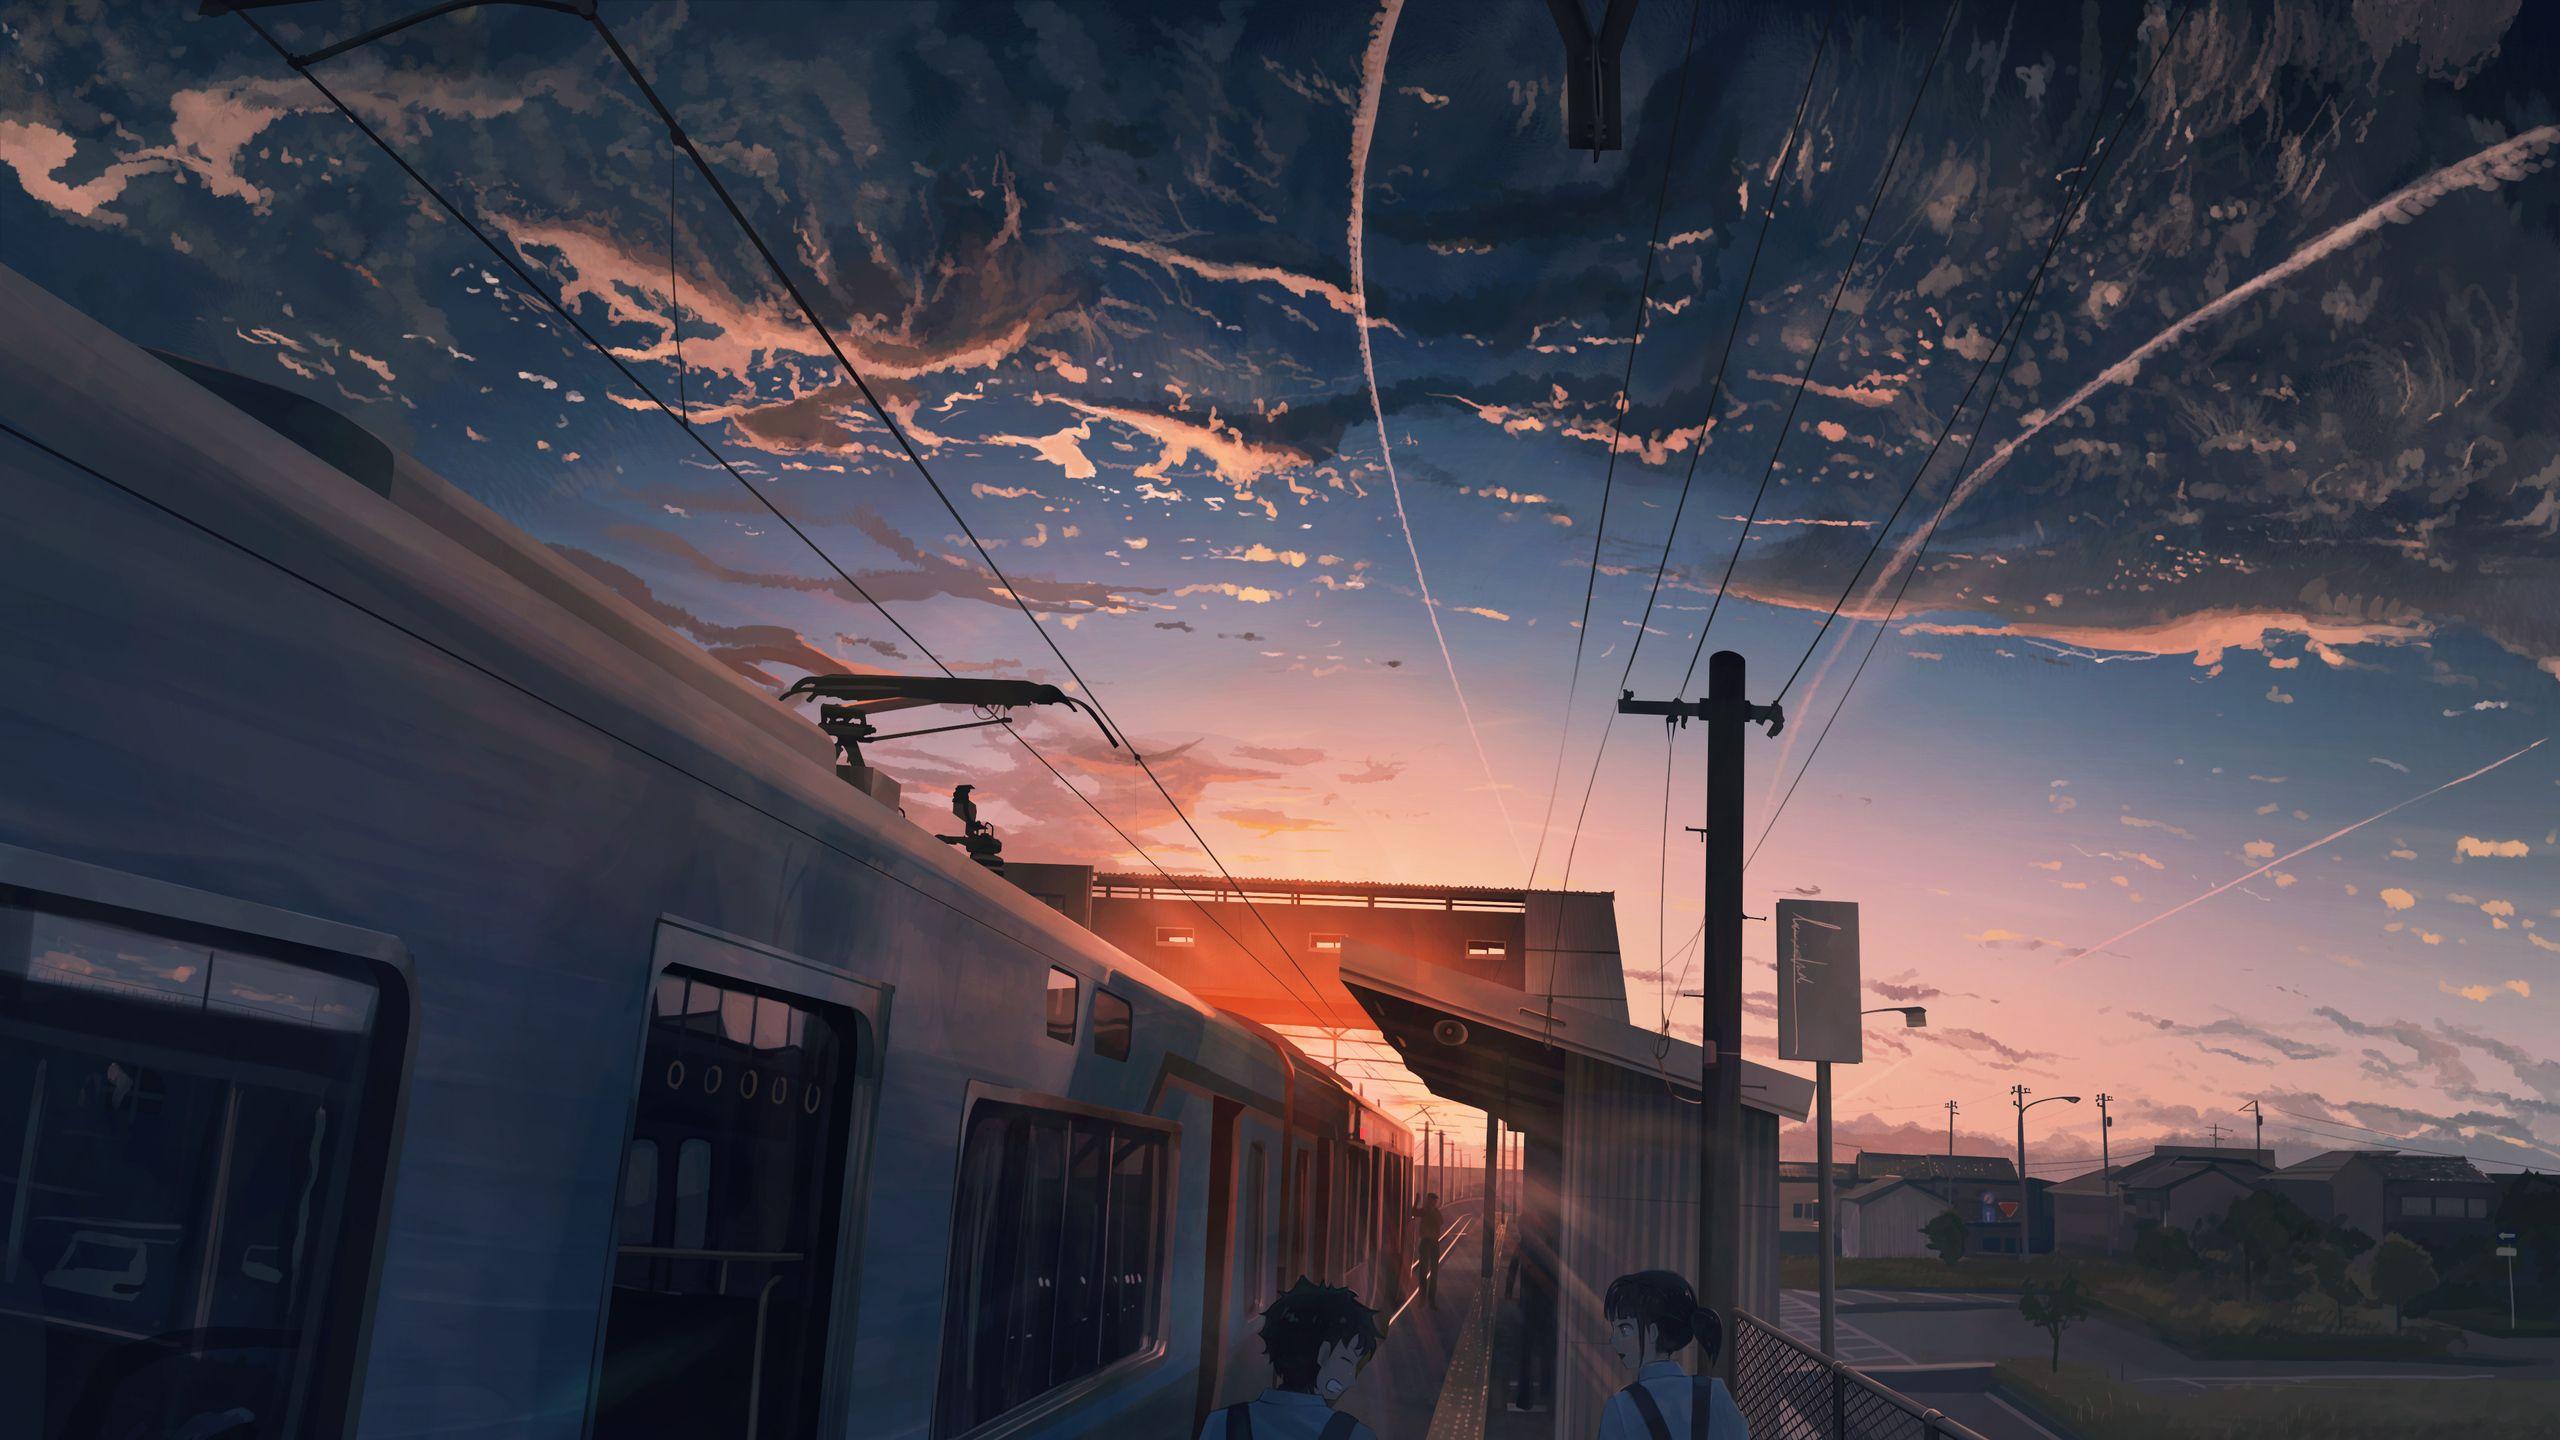 Anime Train Wallpapers Top Free Anime Train Backgrounds Wallpaperaccess You can also upload and share your favorite train backgrounds. anime train wallpapers top free anime